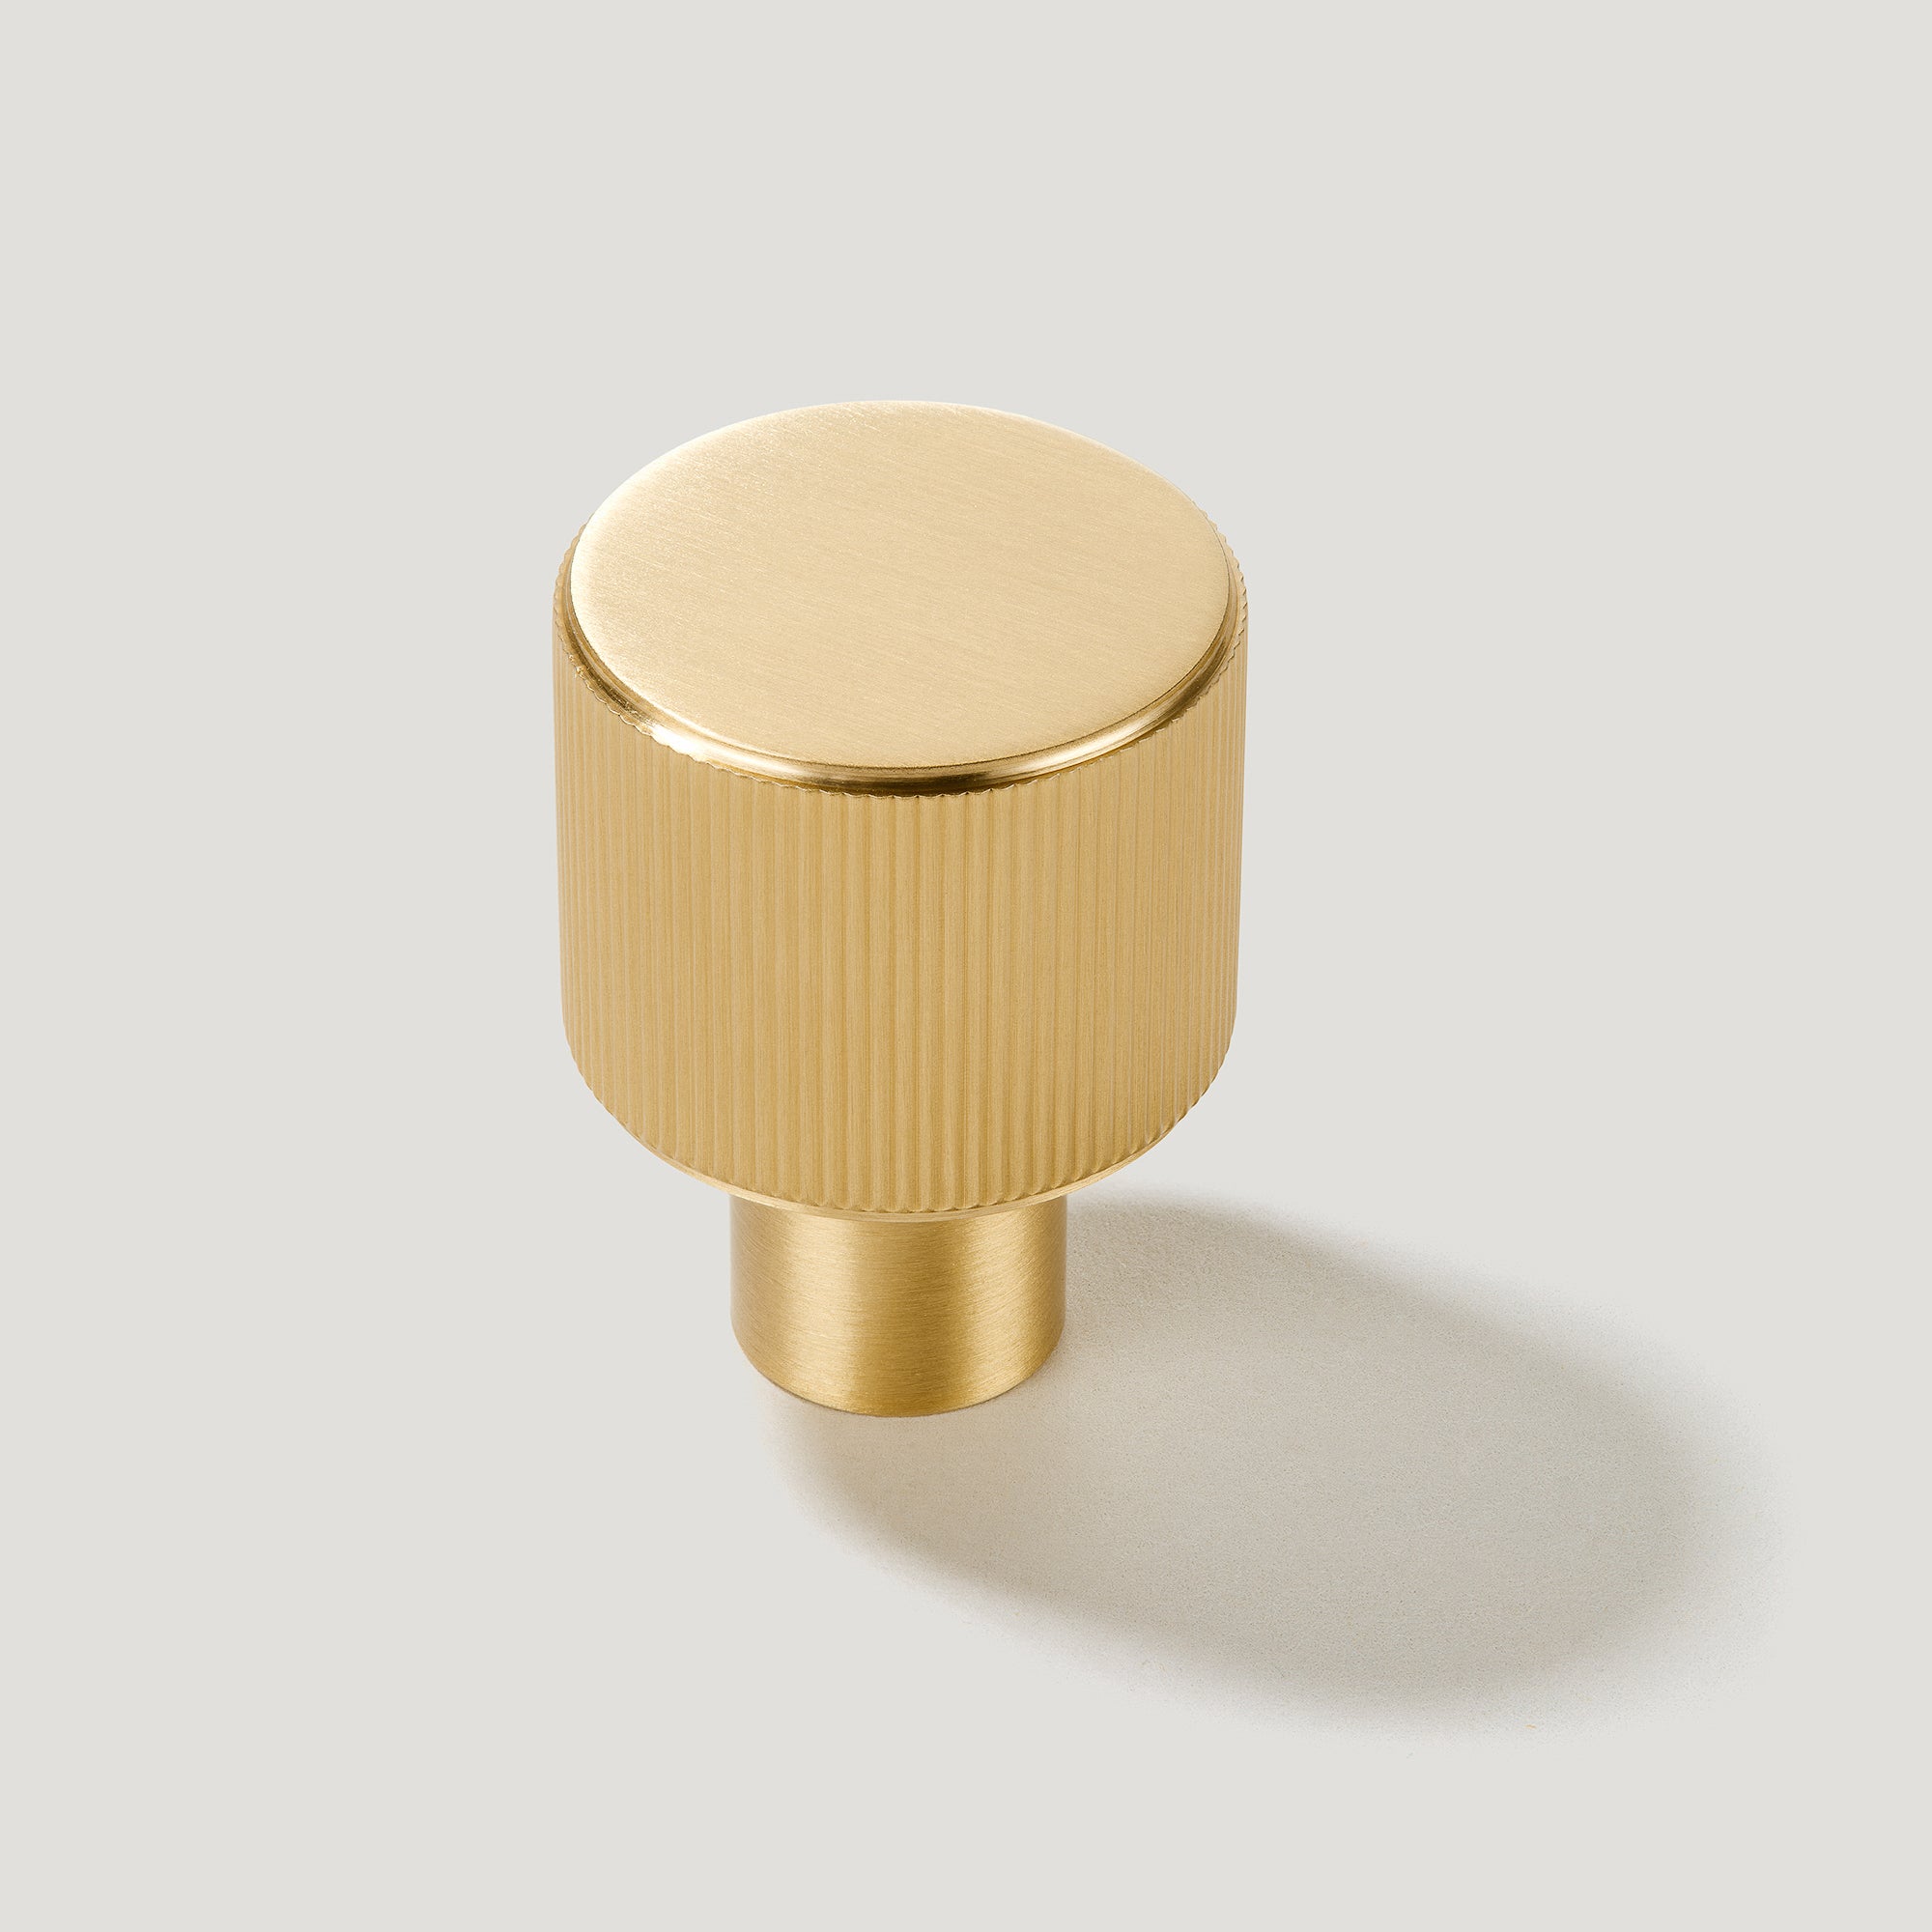 Plank Hardware LENNON Grooved Button Cabinet Knob - Brass